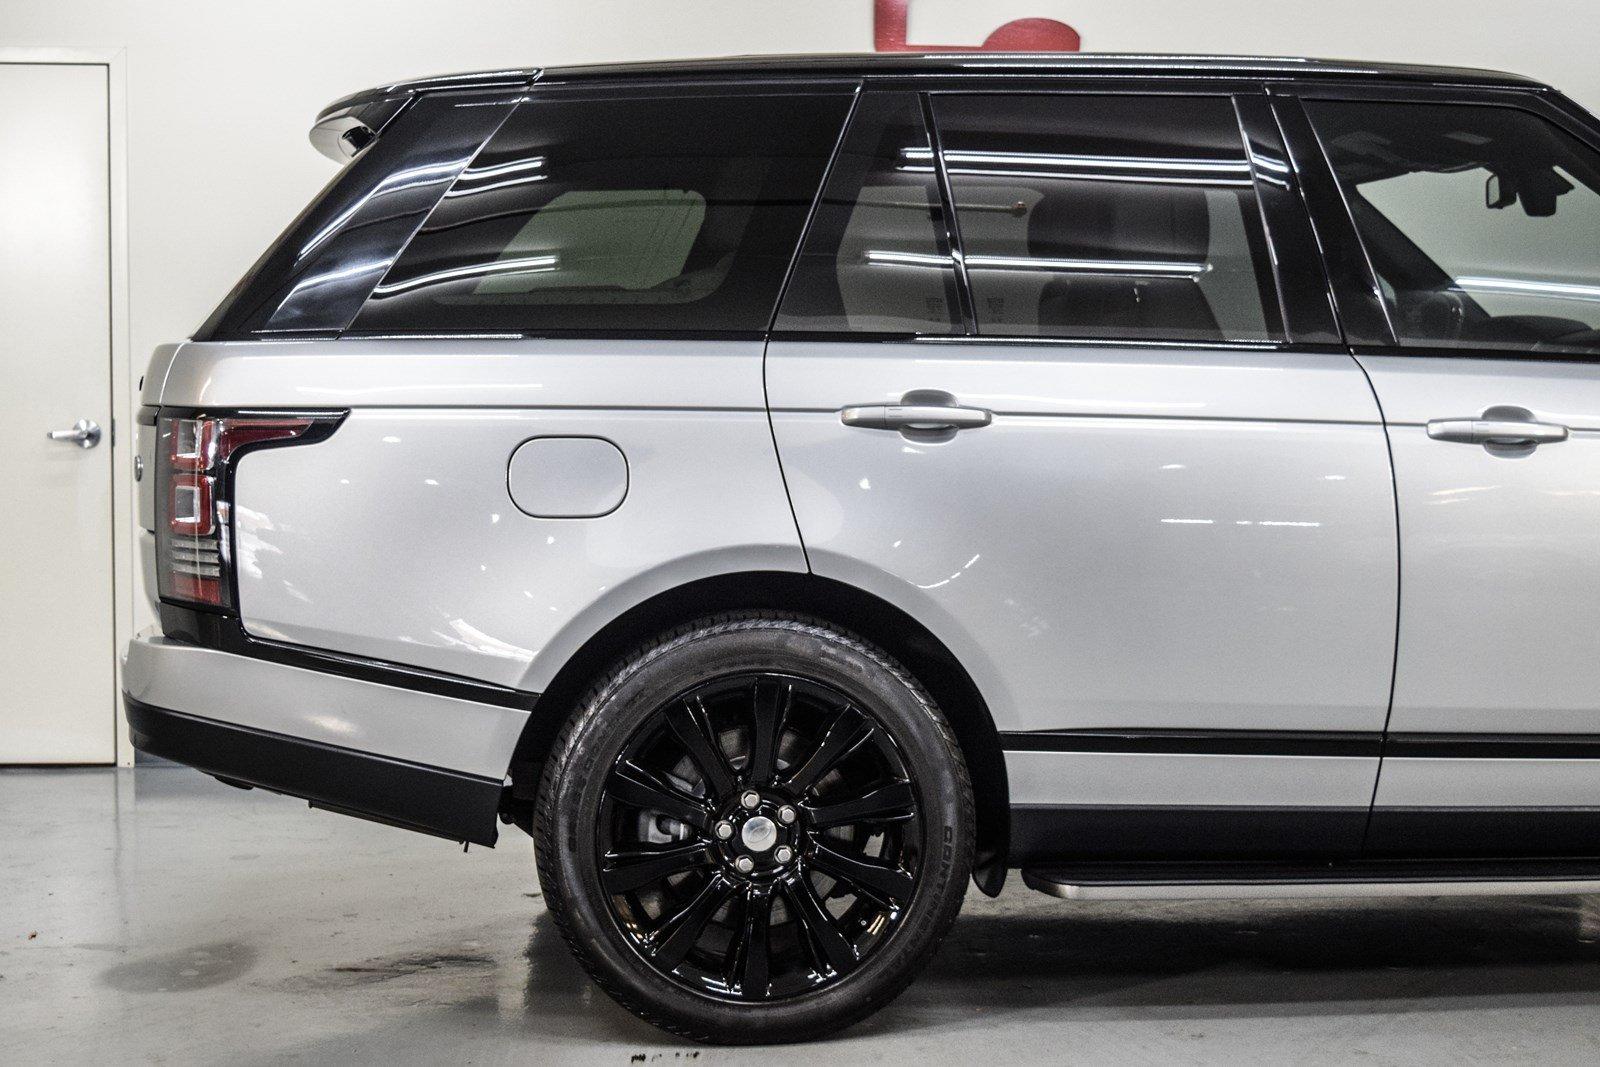 Used 2014 Land Rover Range Rover Supercharged for sale Sold at Gravity Autos Marietta in Marietta GA 30060 28